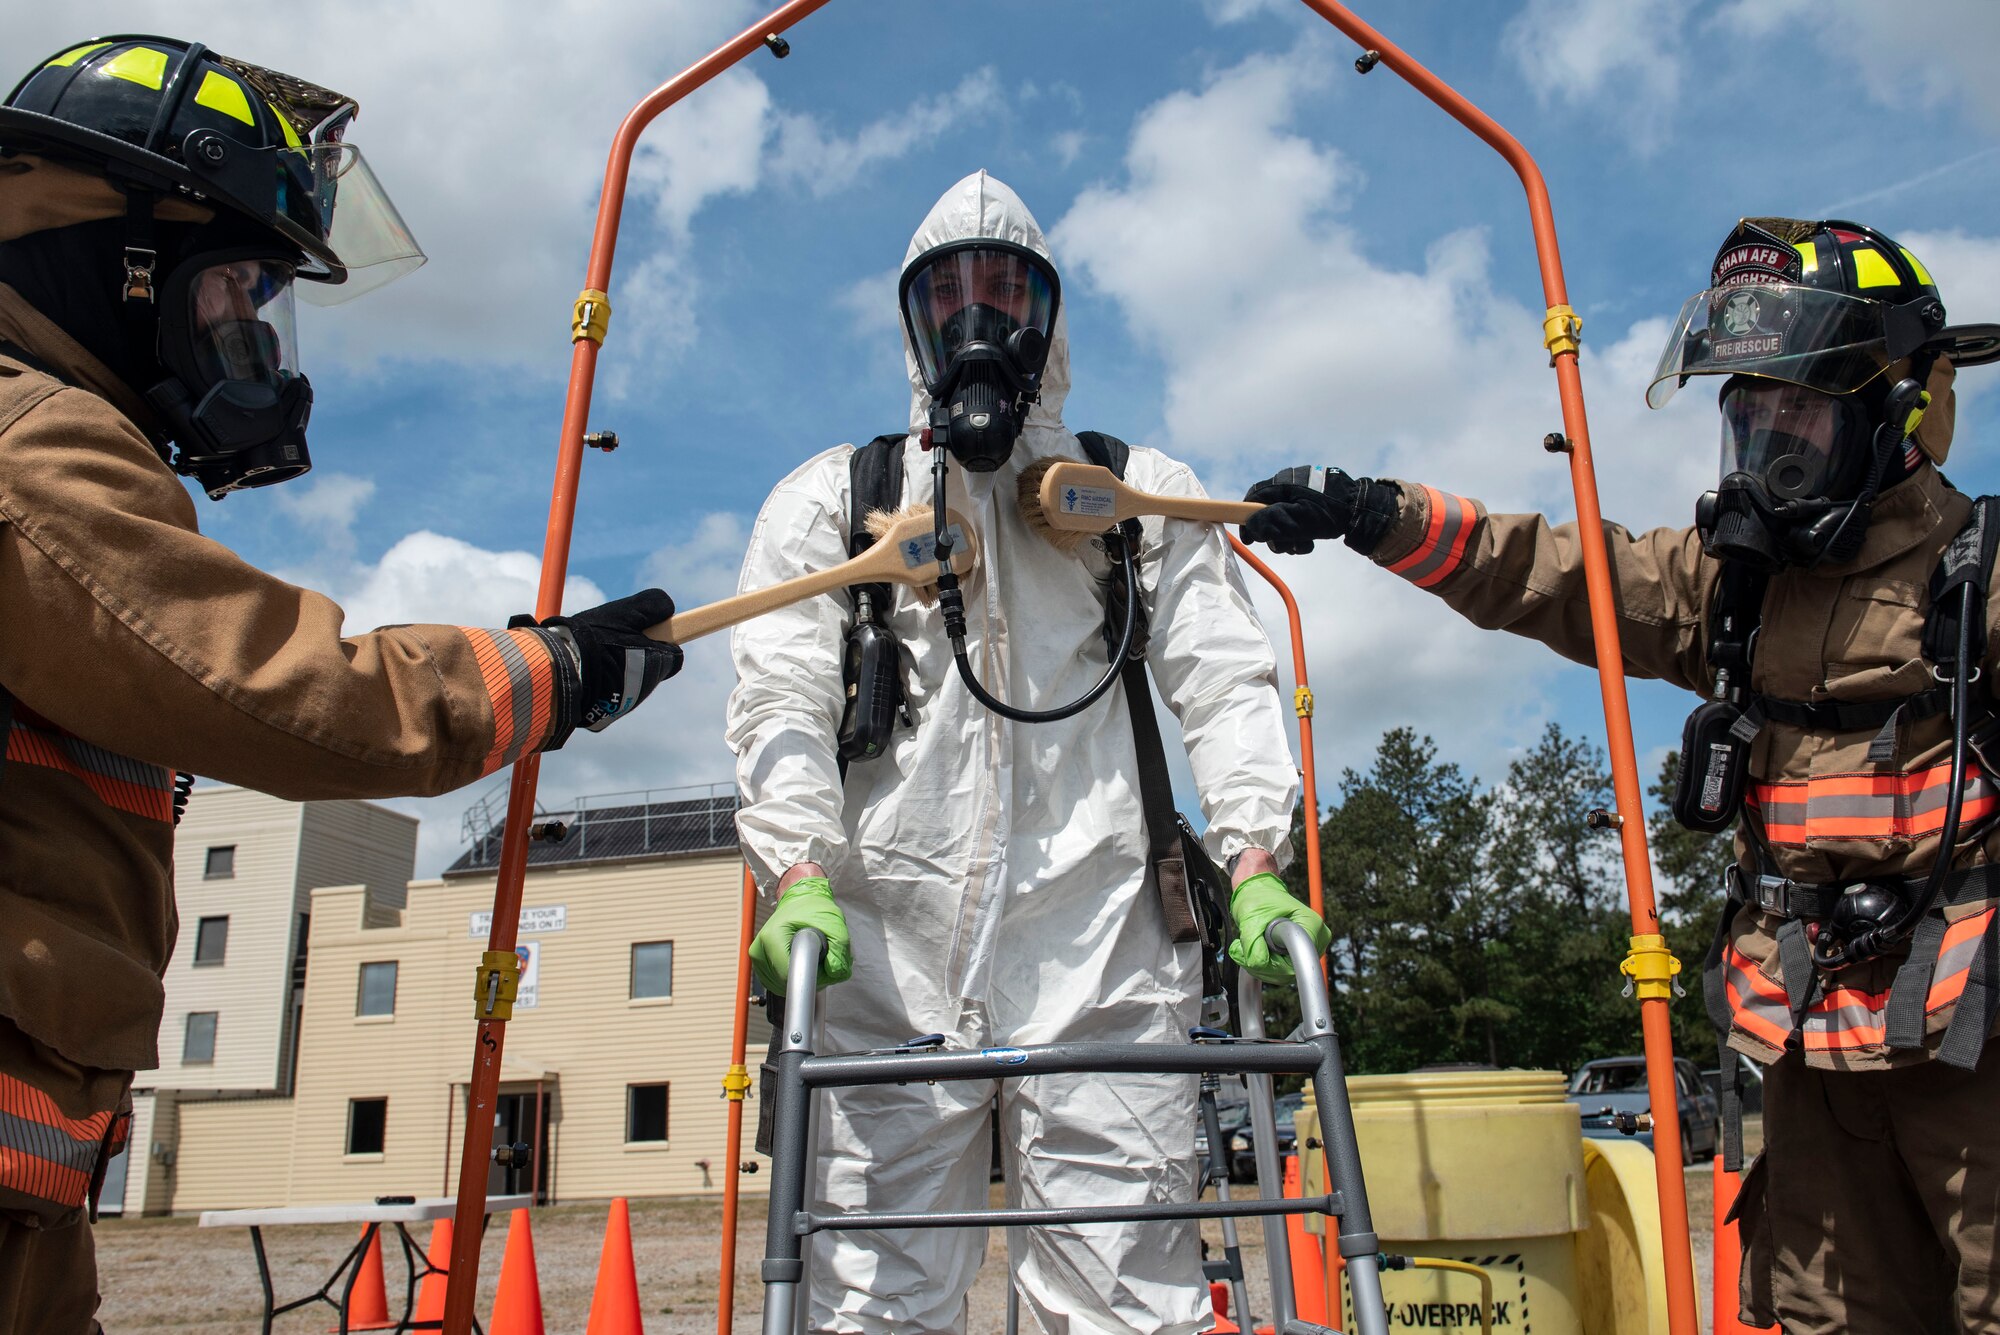 Firefighters simulate decontaminating their wingman